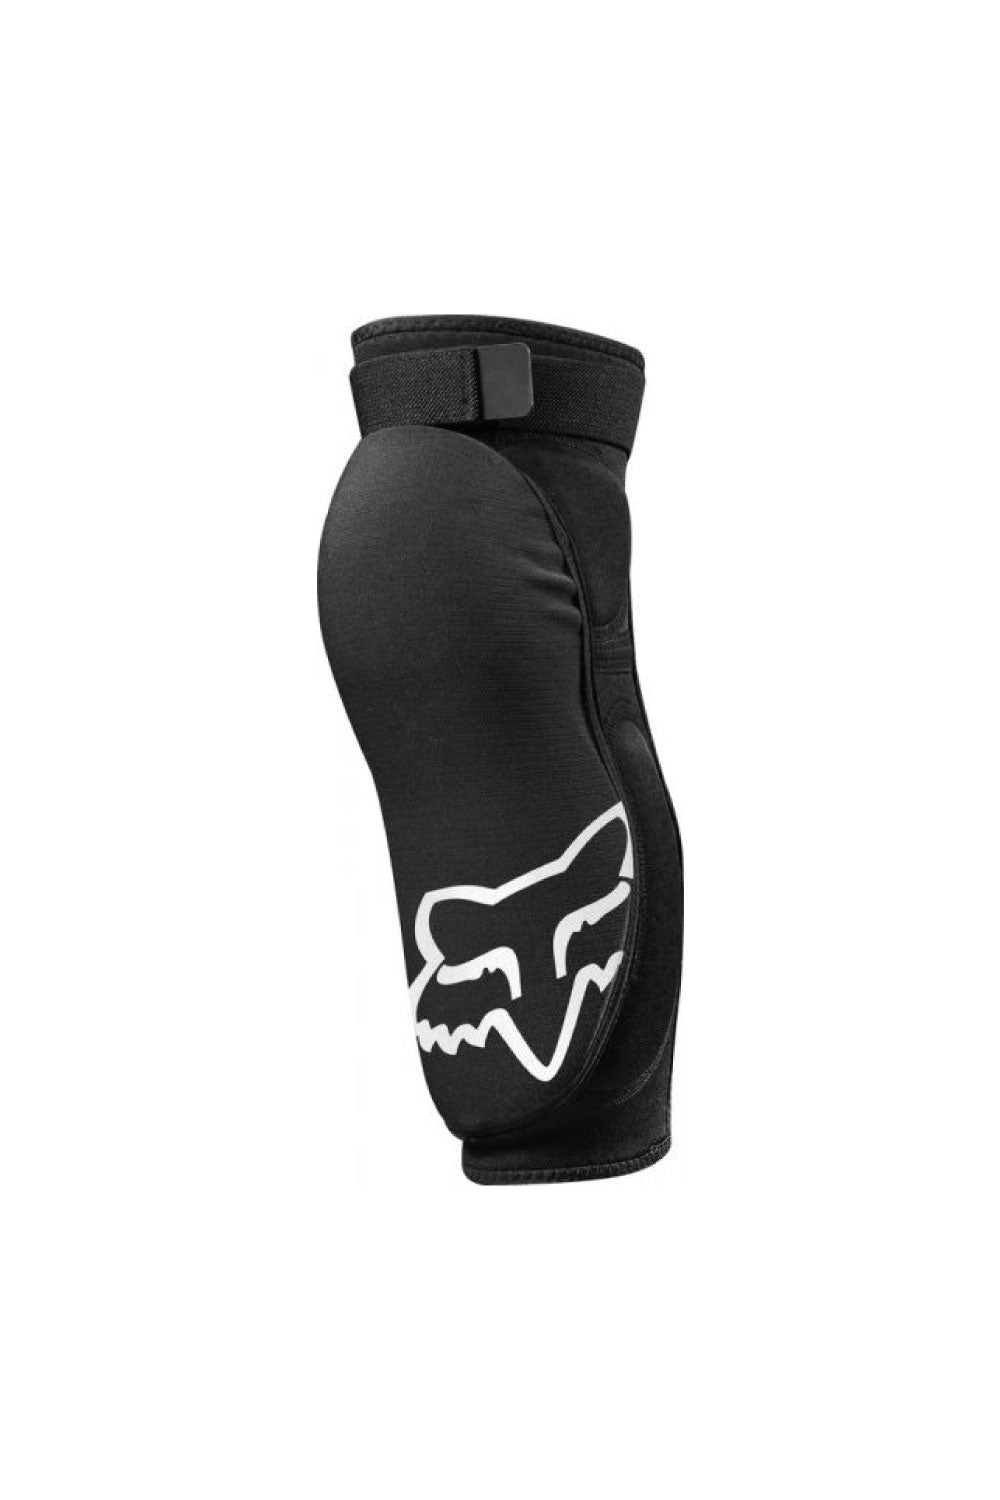 bicycle elbow pads